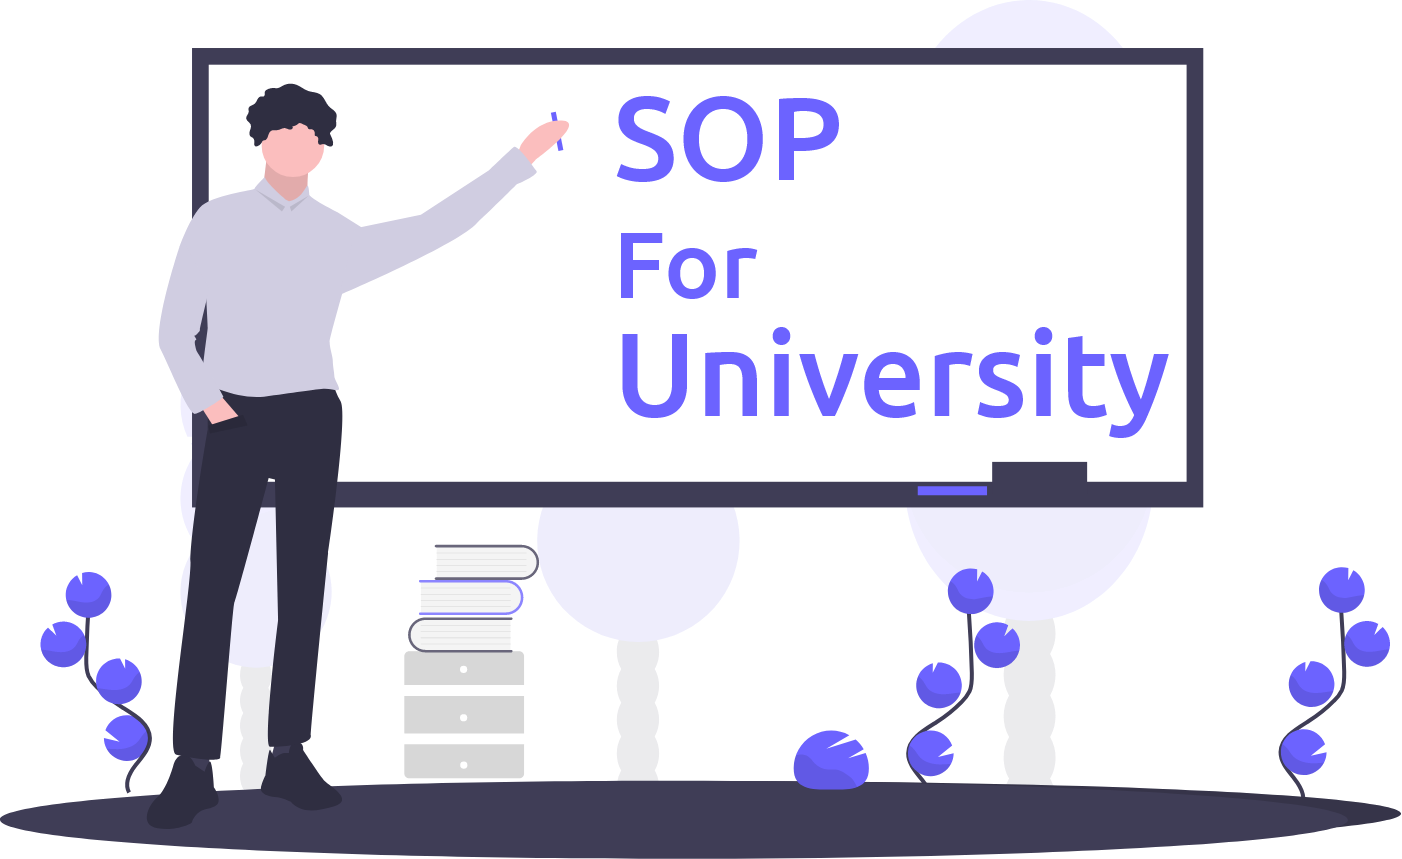 Why Standard Operating Procedures (SOP) required for educational universities/institutions?